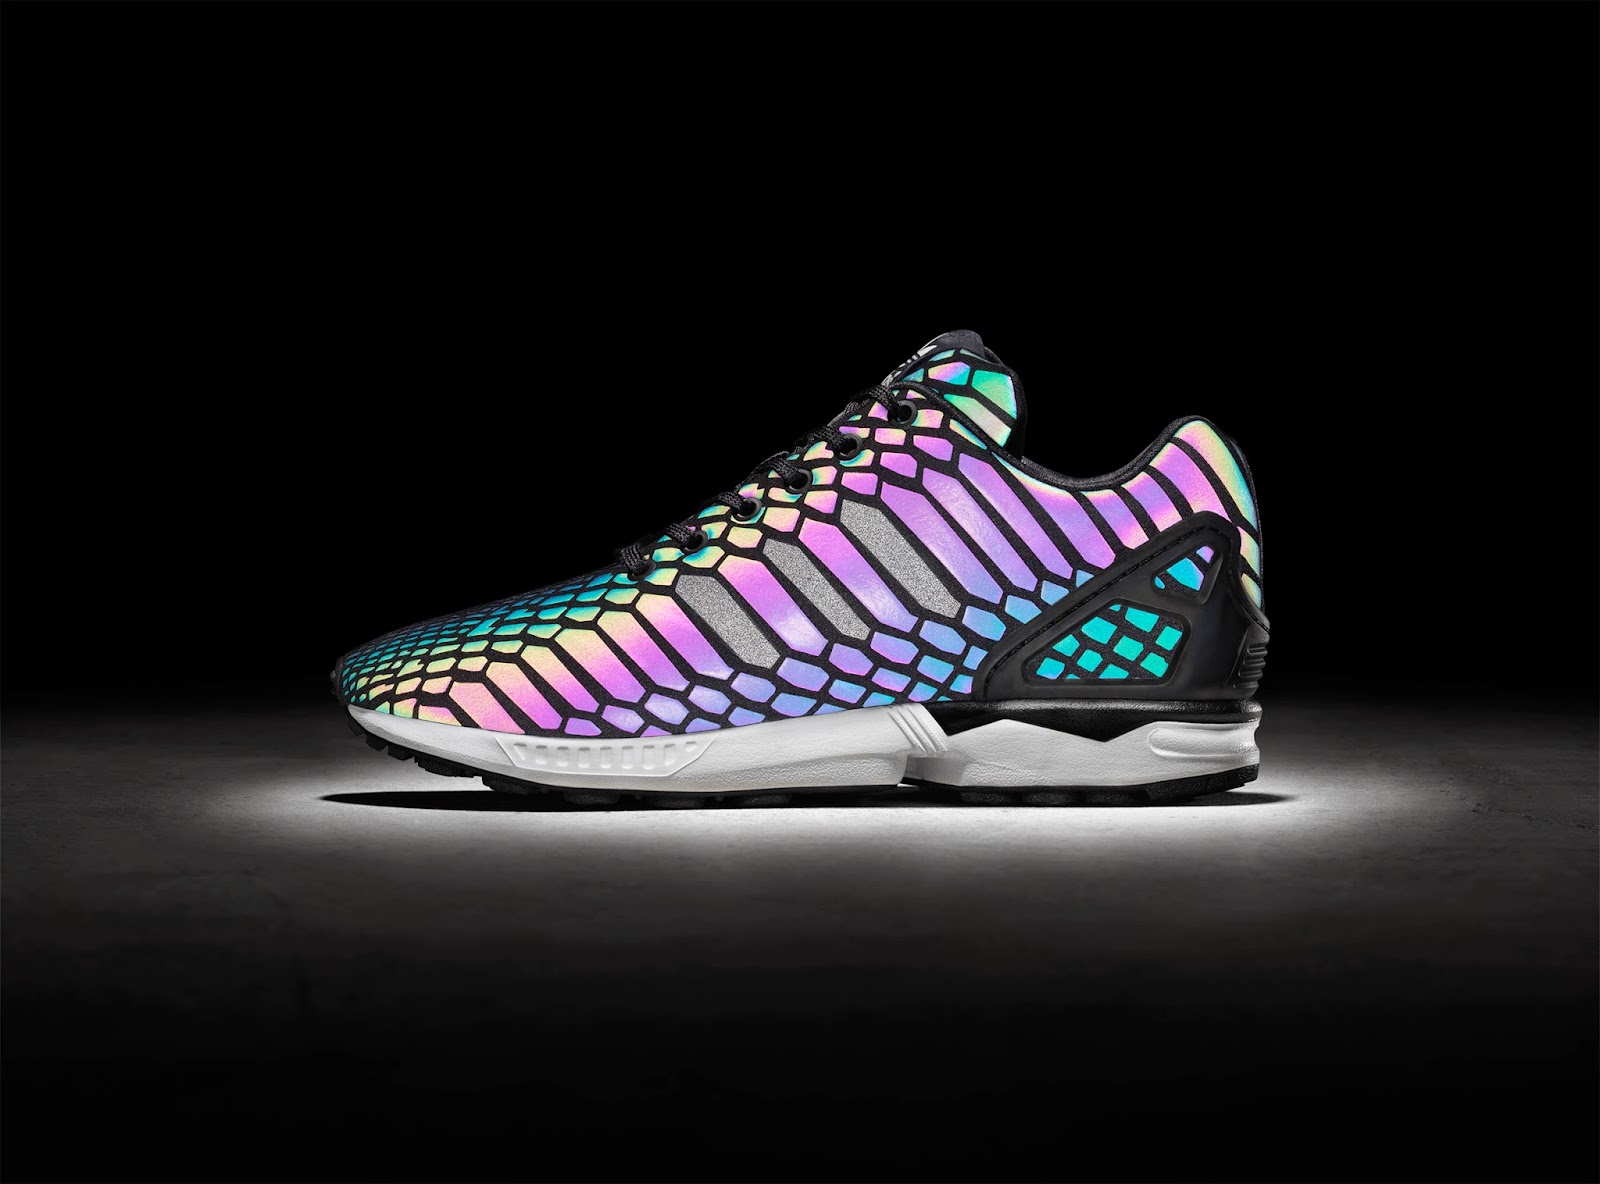 Super Punch: Iridescent Adidas sneakers